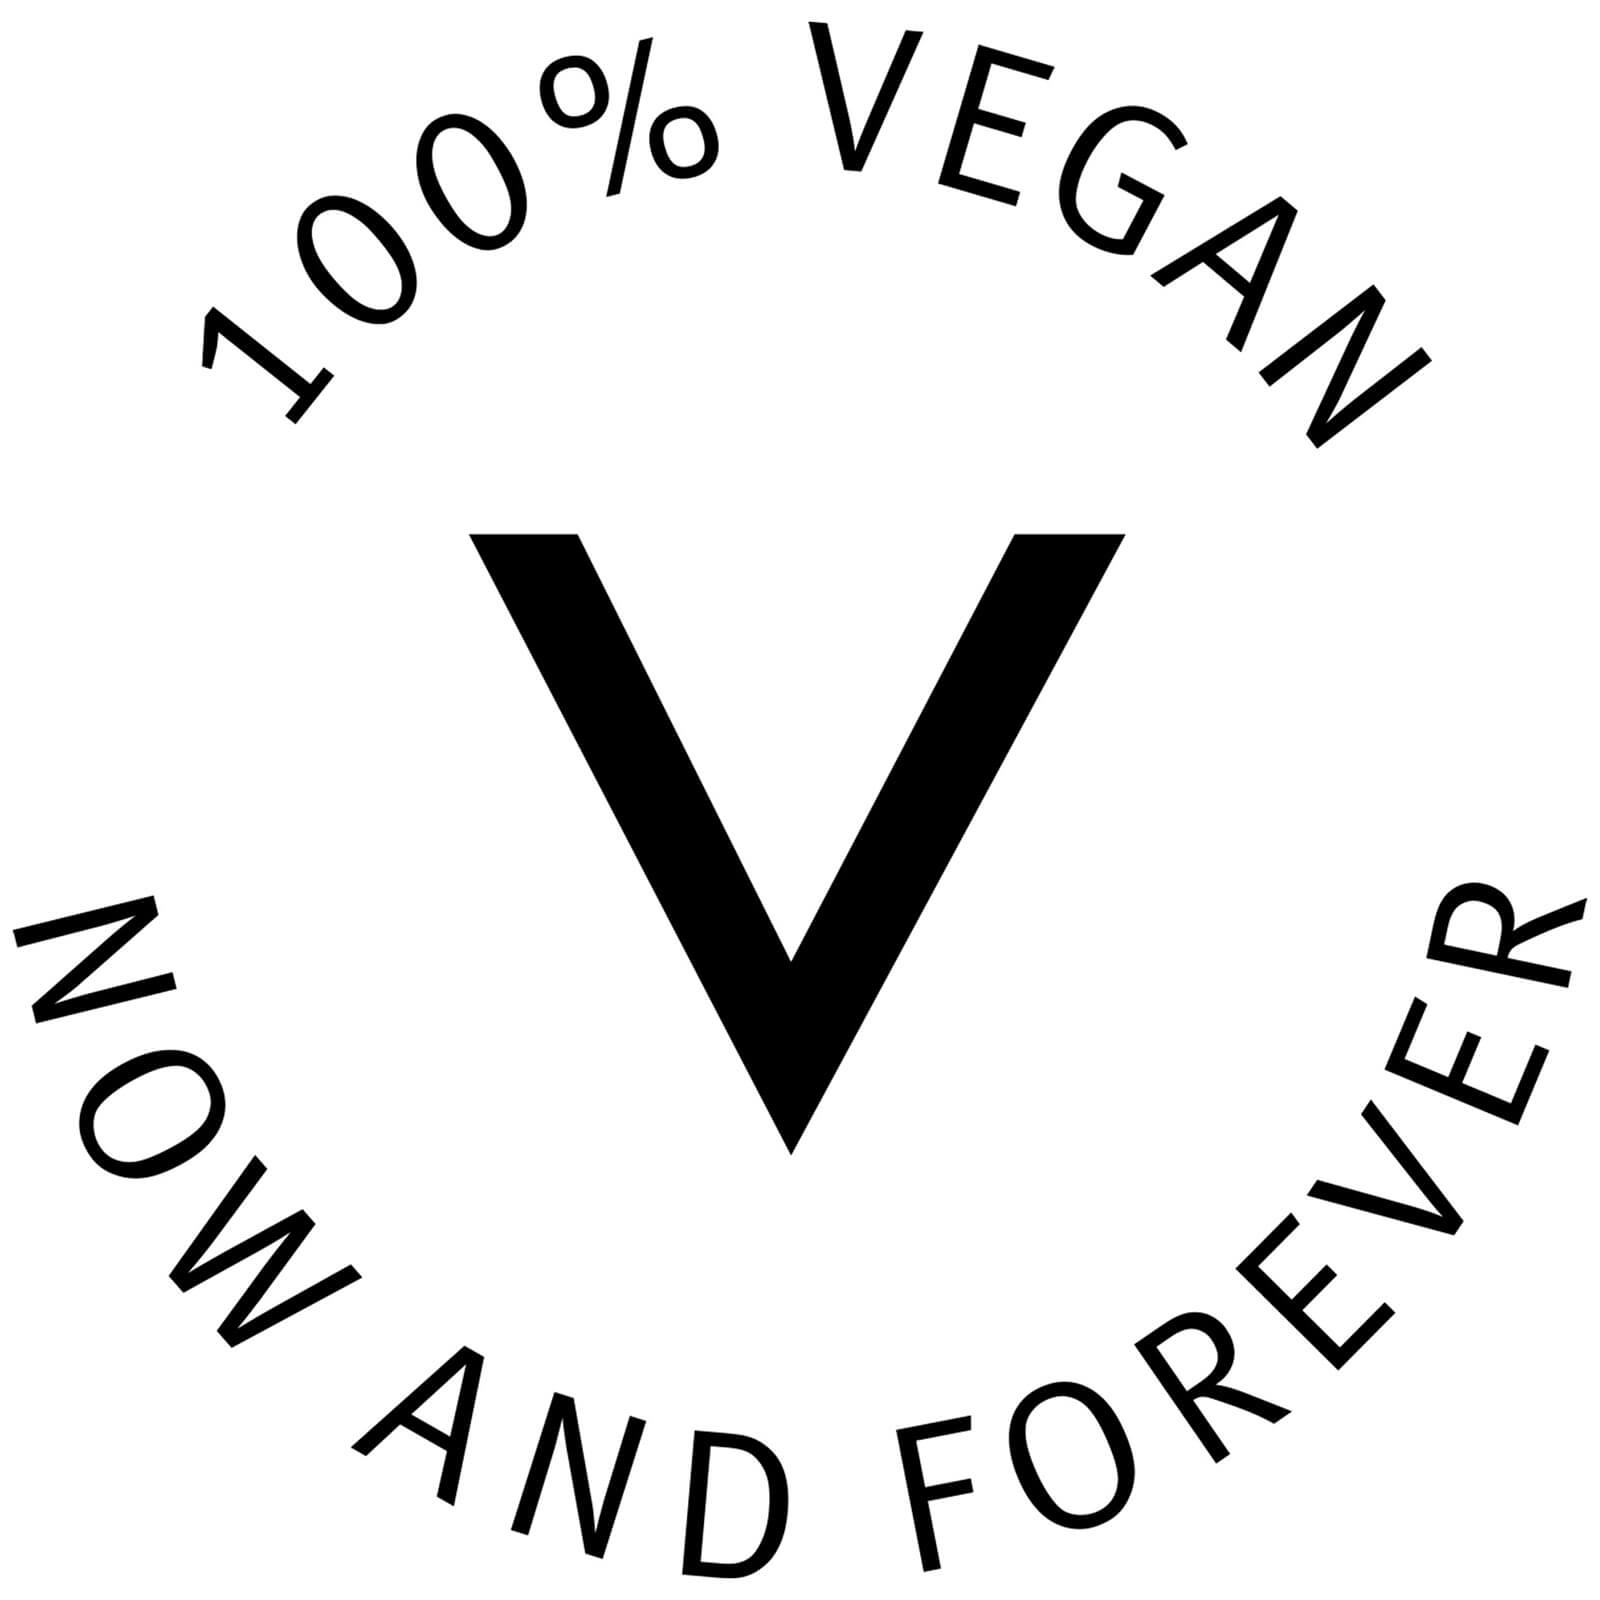 100% Vegan, Now and forever